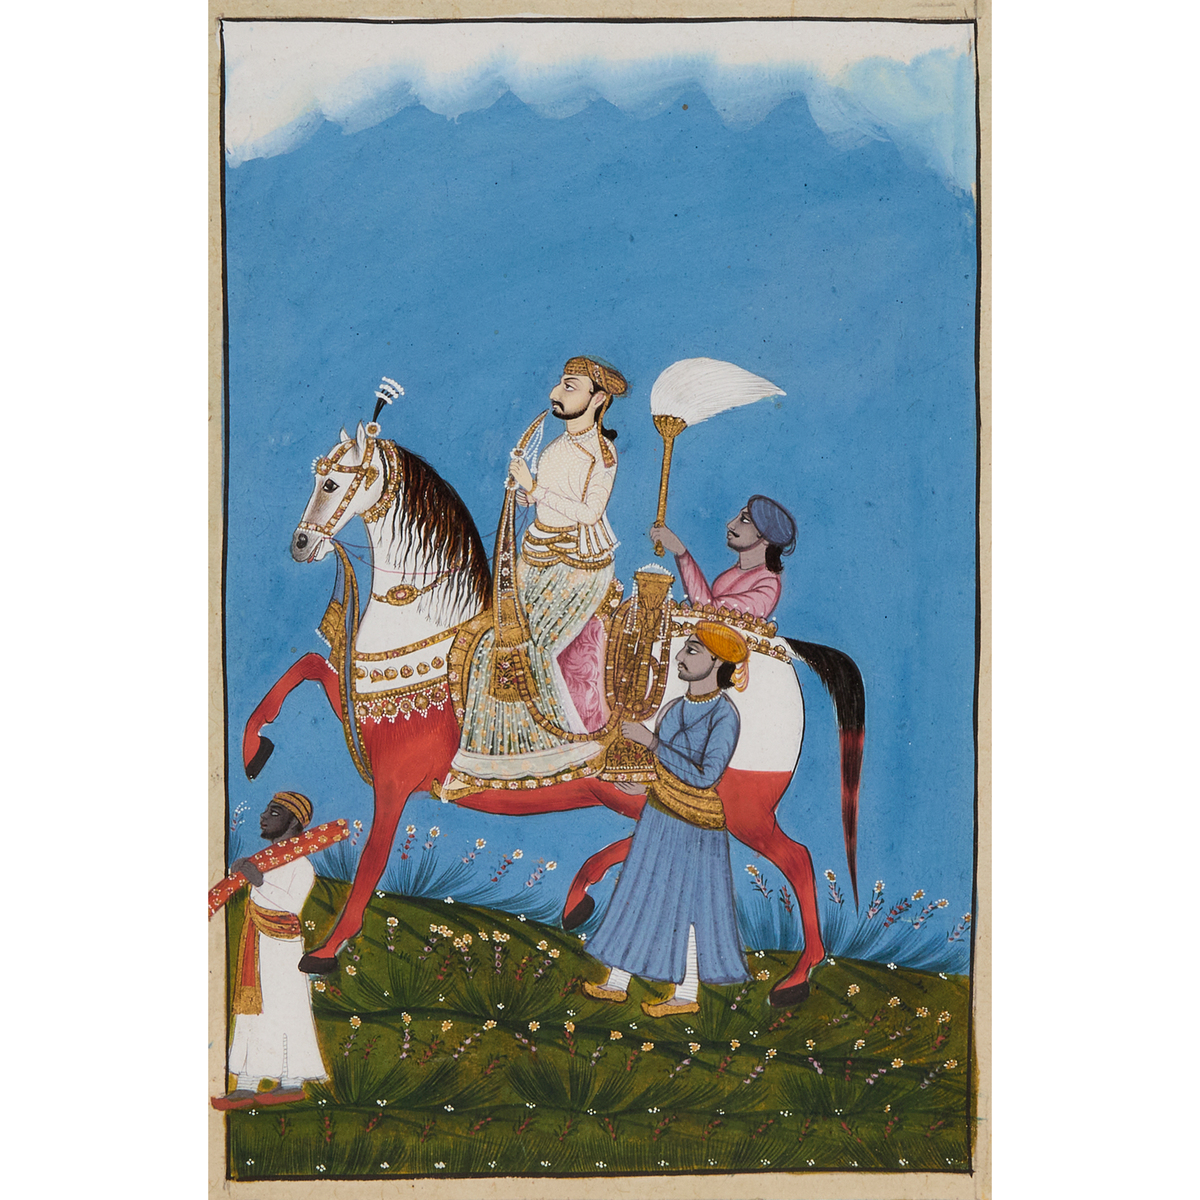 An Equestrian Portrait of a Prince, Rajasthan, North India, 18th/19th Century, sheet 13 x 8.7 in — 3